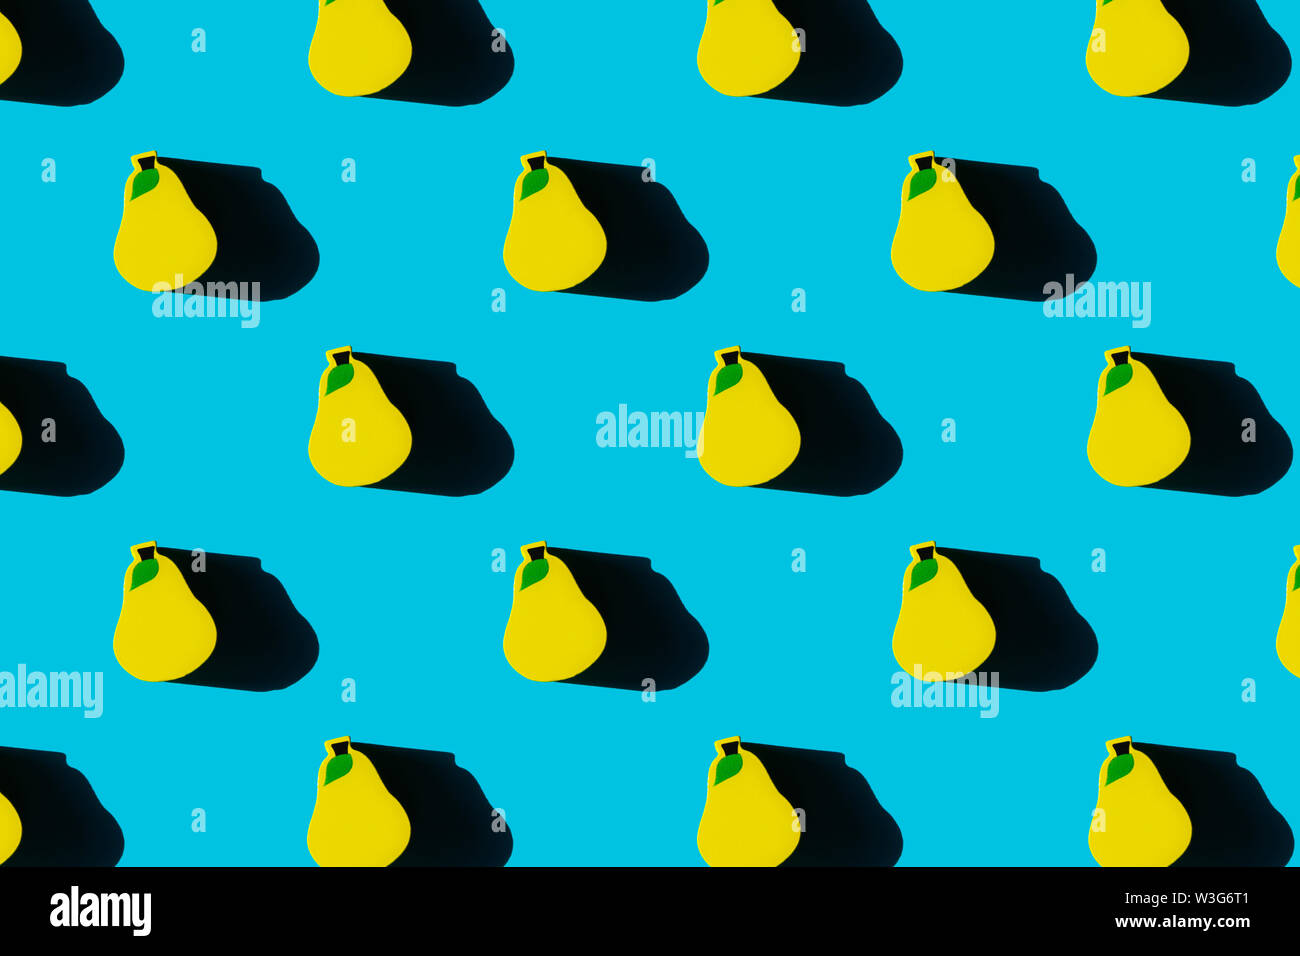 Colorful fruit pattern of yellow wooden pears on blue background. Top view. Stock Photo